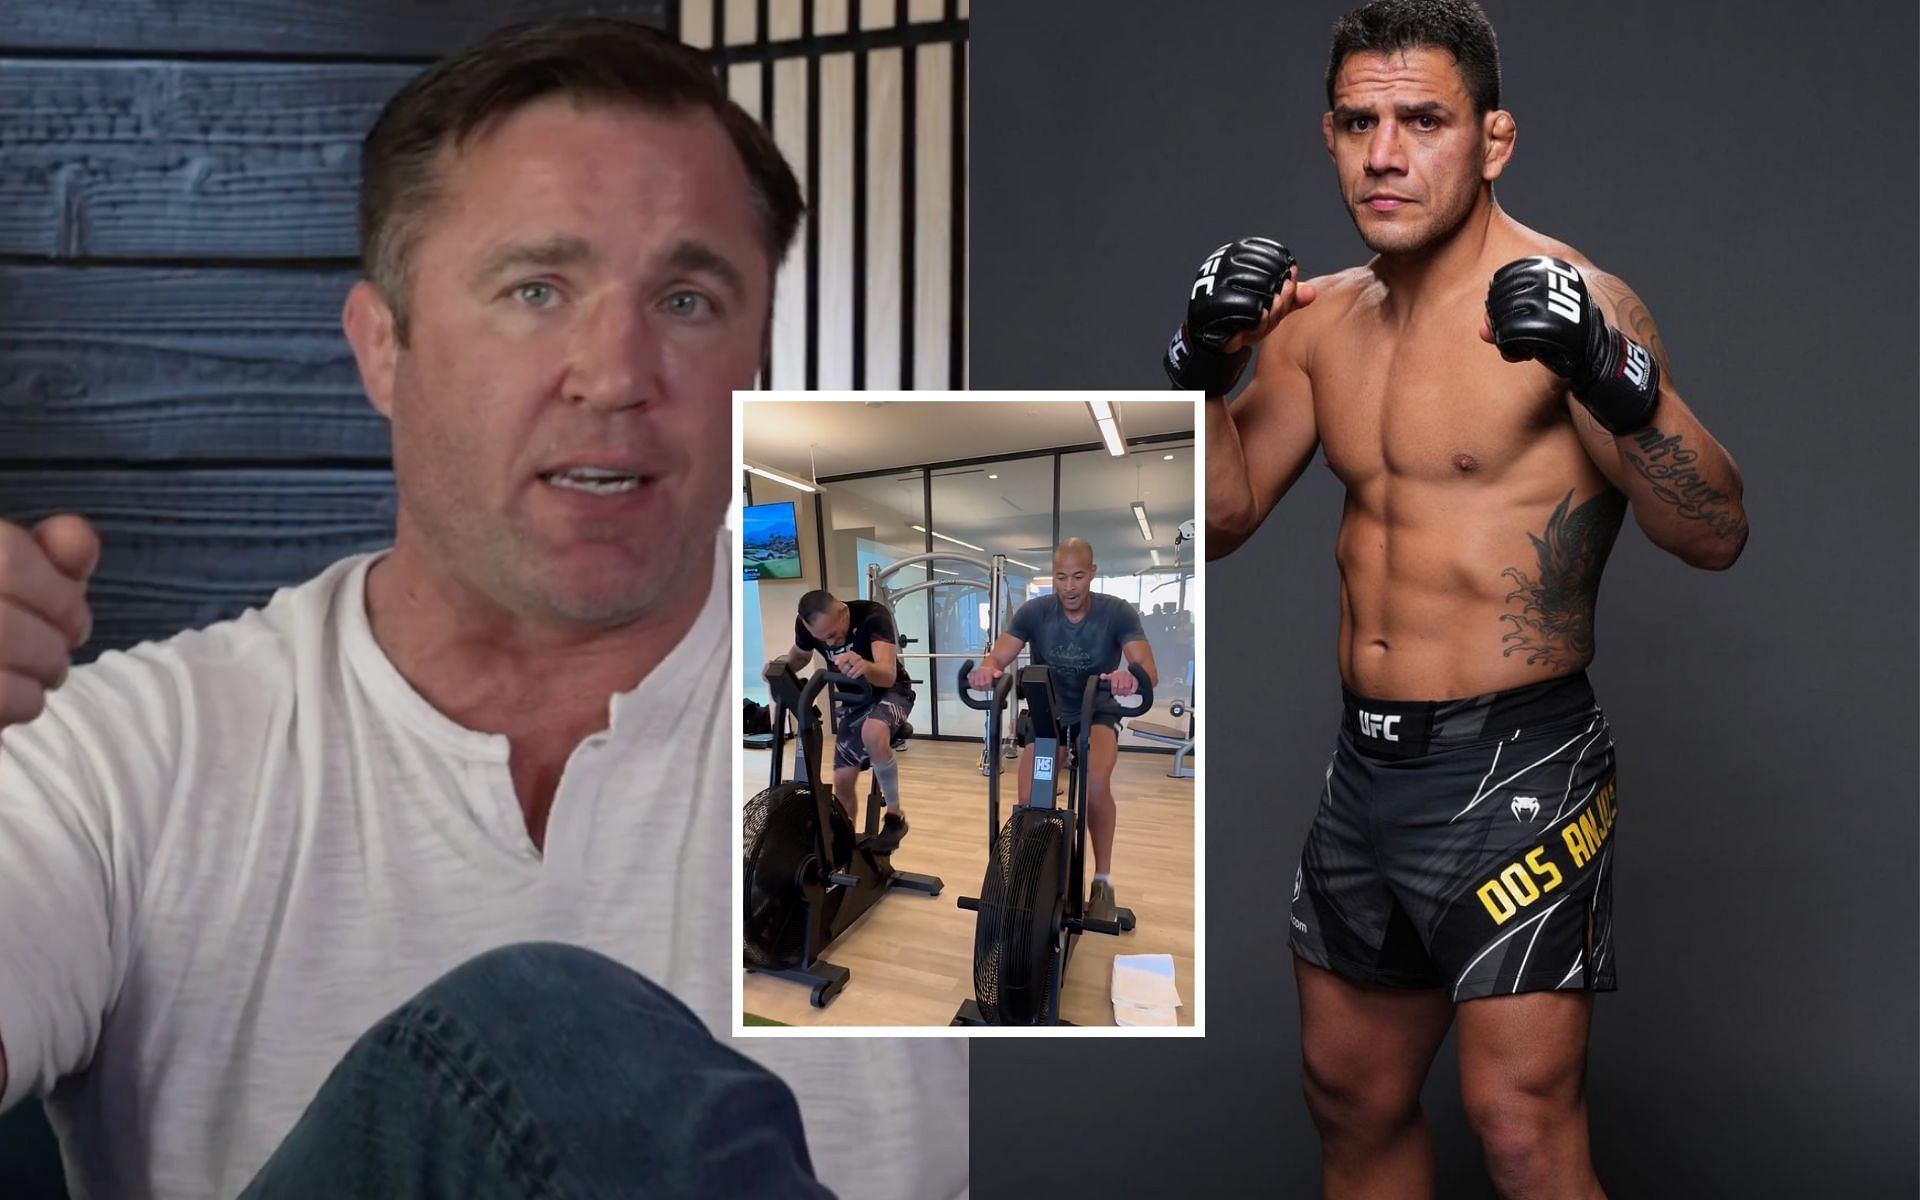 Tony Ferguson: Only has a certain amount of energy - Chael Sonnen weighs  in after former champ finds Tony Ferguson's workout with David Goggins  unhelpful